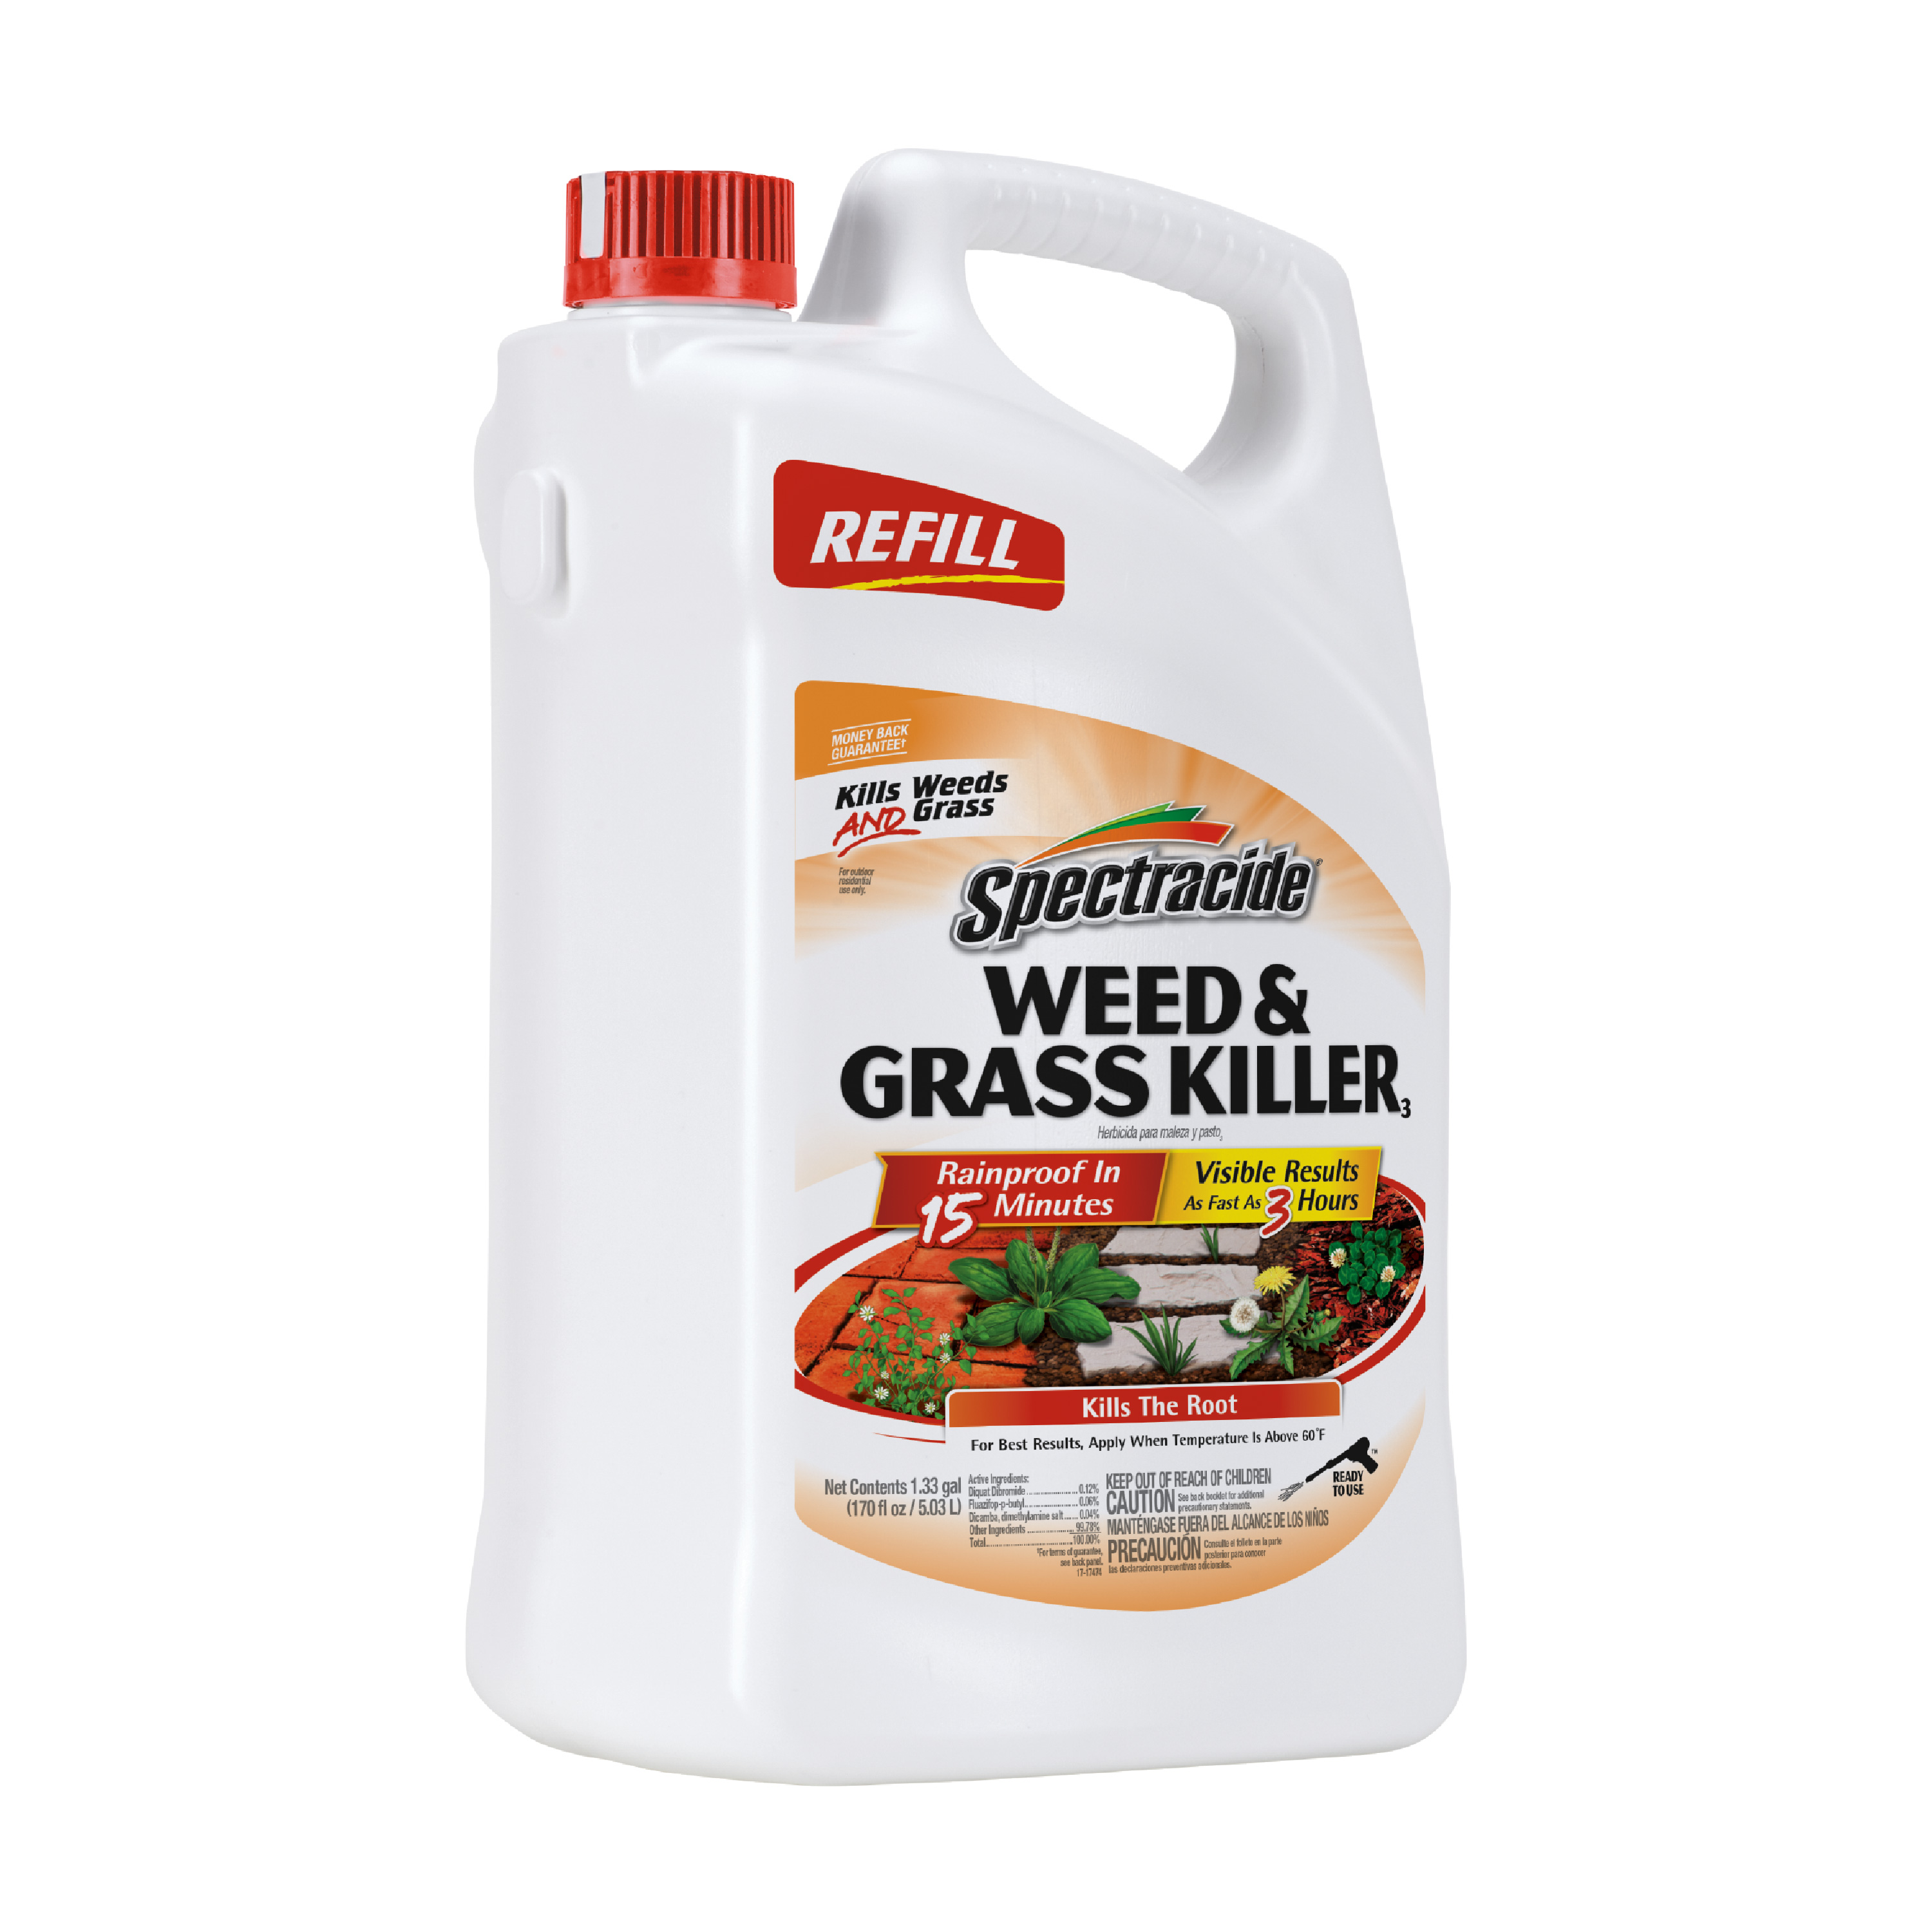 Spectracide Weed & Grass Killer (Refill), Use on Driveways, Walkways and Around Trees and Flower Beds, 1.3 Gallon - image 4 of 13